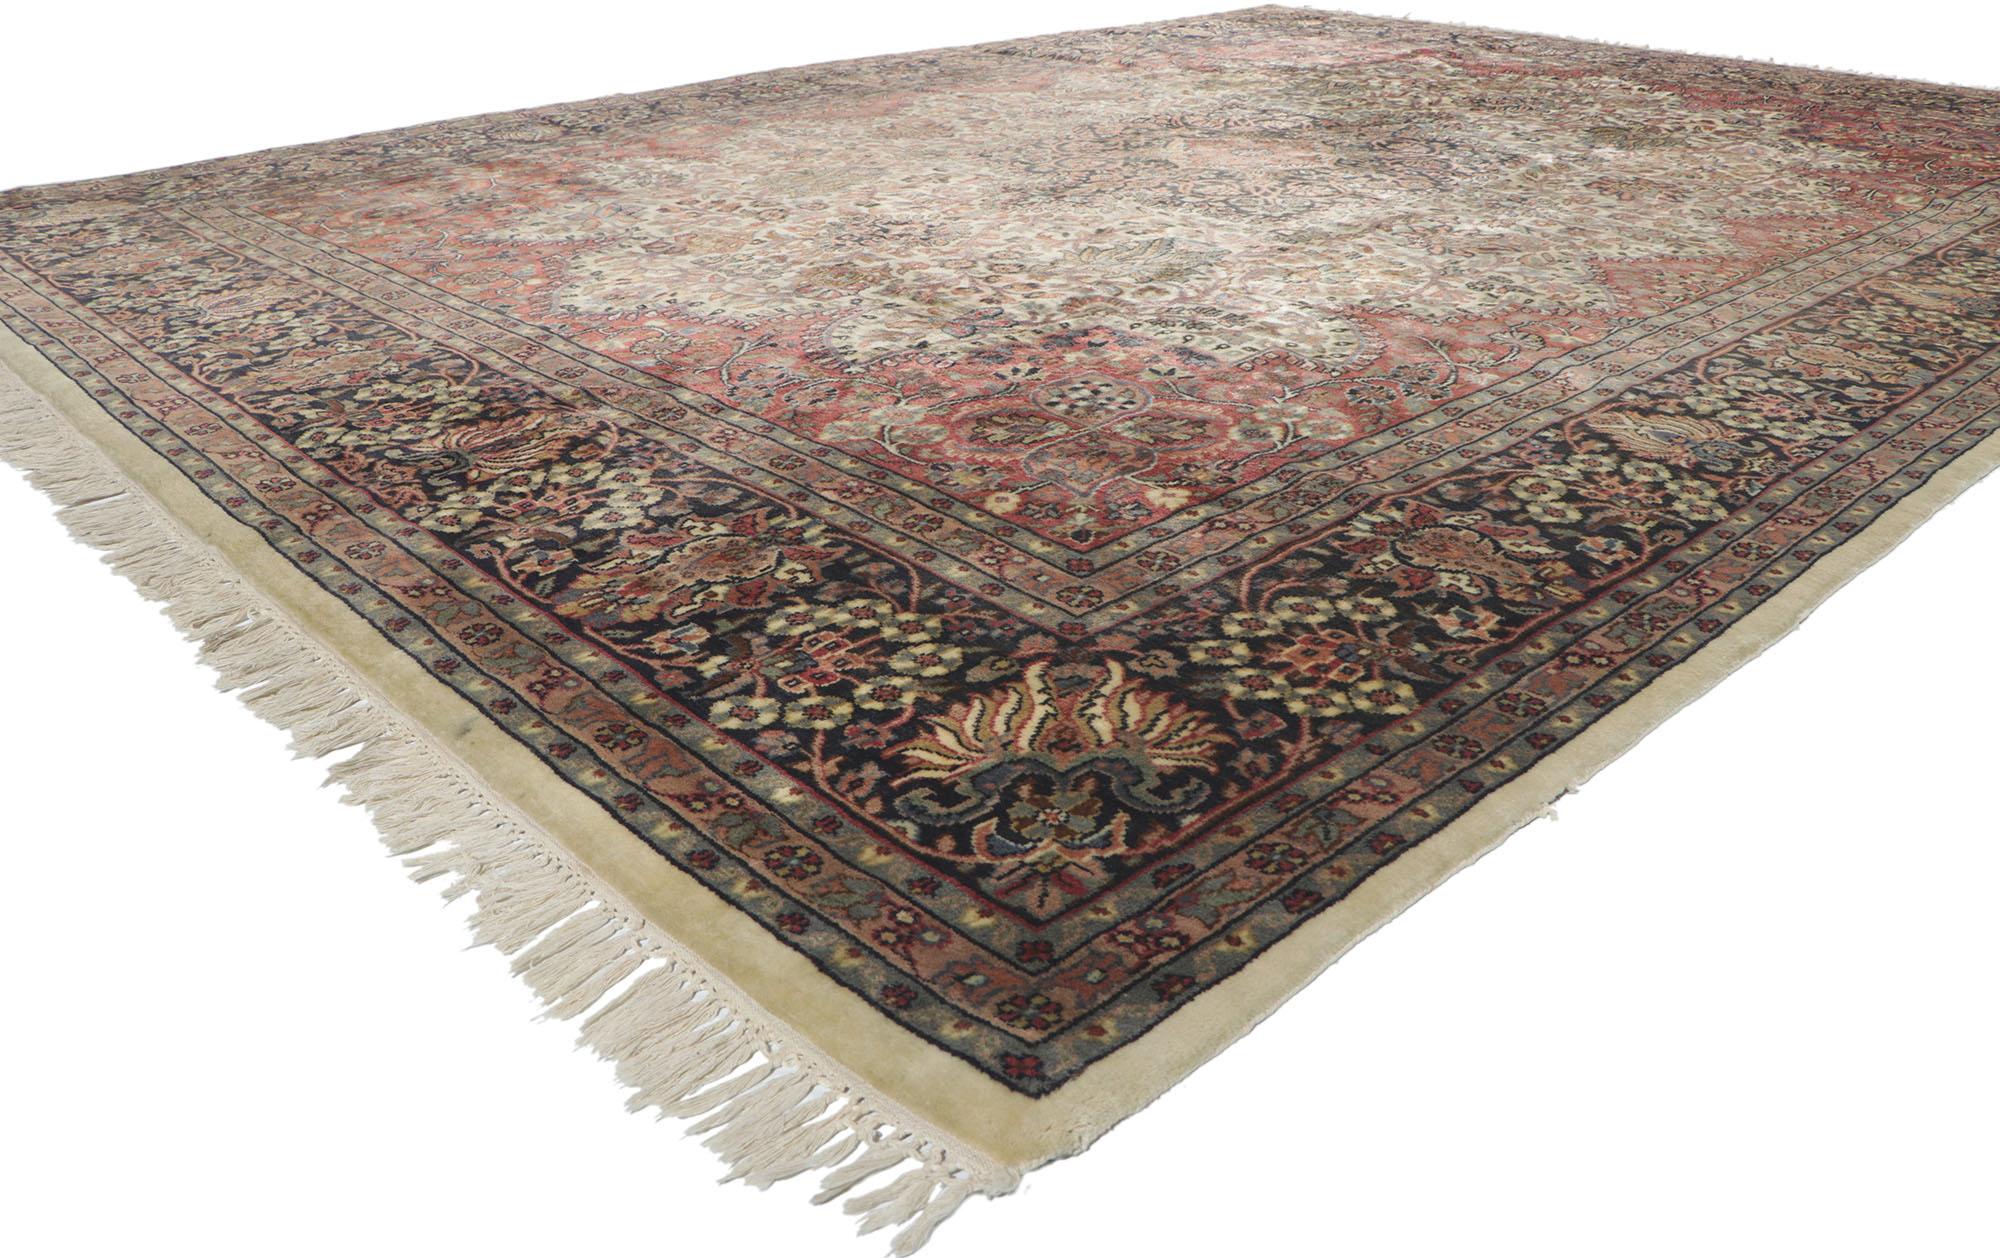 78227 vintage Indian rug 09'03 x 12'07. Rendered in variegated shades of rosewood, brick red, beige, berry, navy blue, mauve, tan, glaucous, sage, brown, rose, coffee, cerulean, verdigris, and sky blue with other accent colors. Desirable age wear.